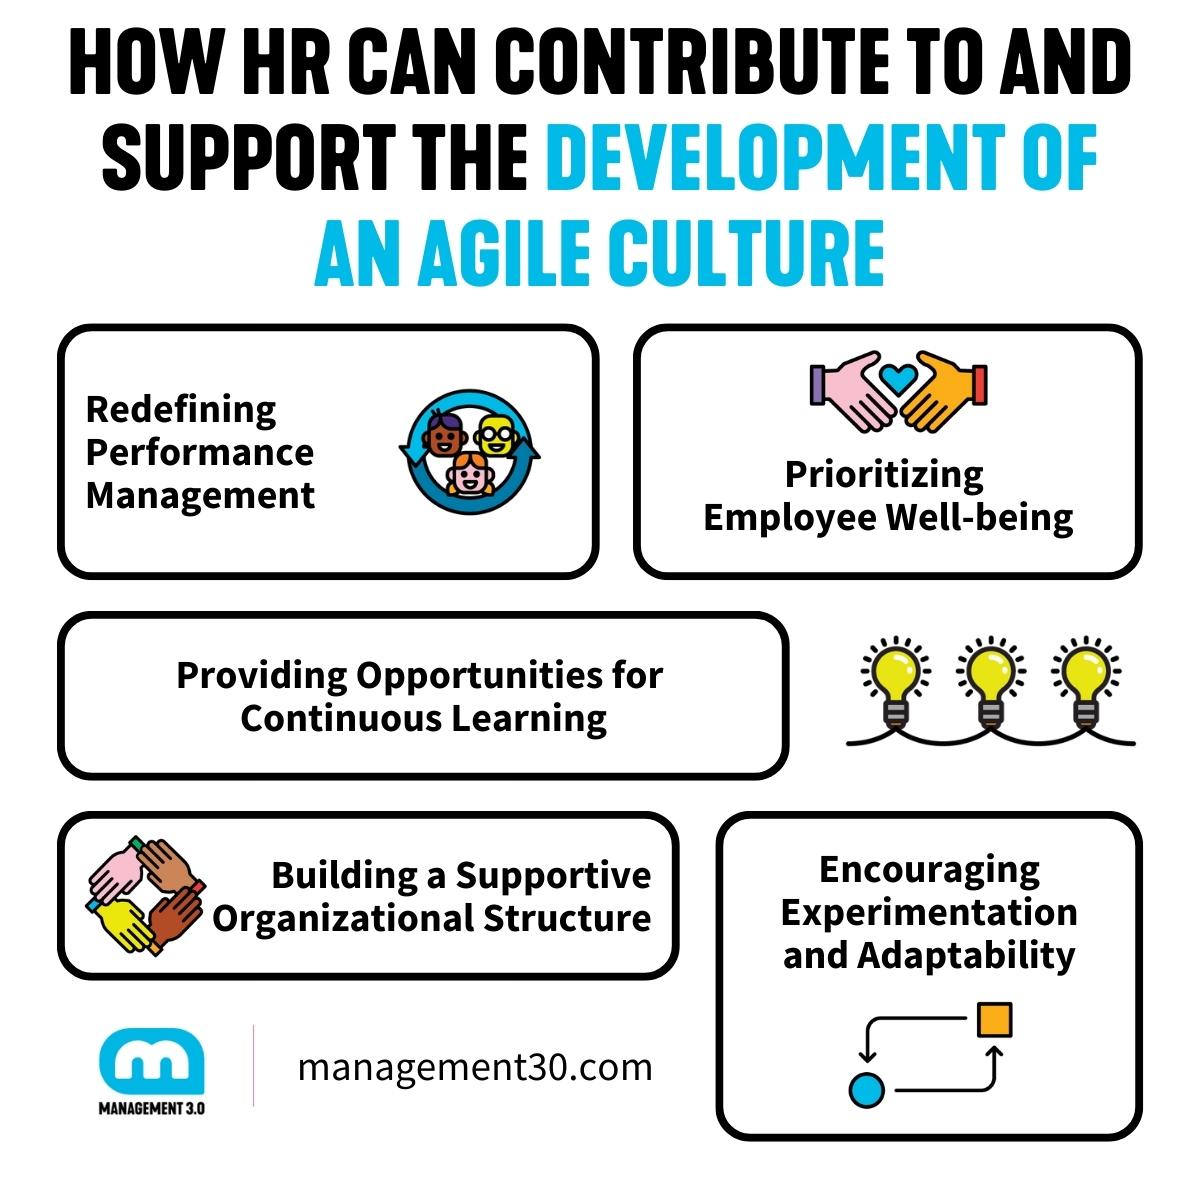 How HR can contribute to and support the development of an agile culture